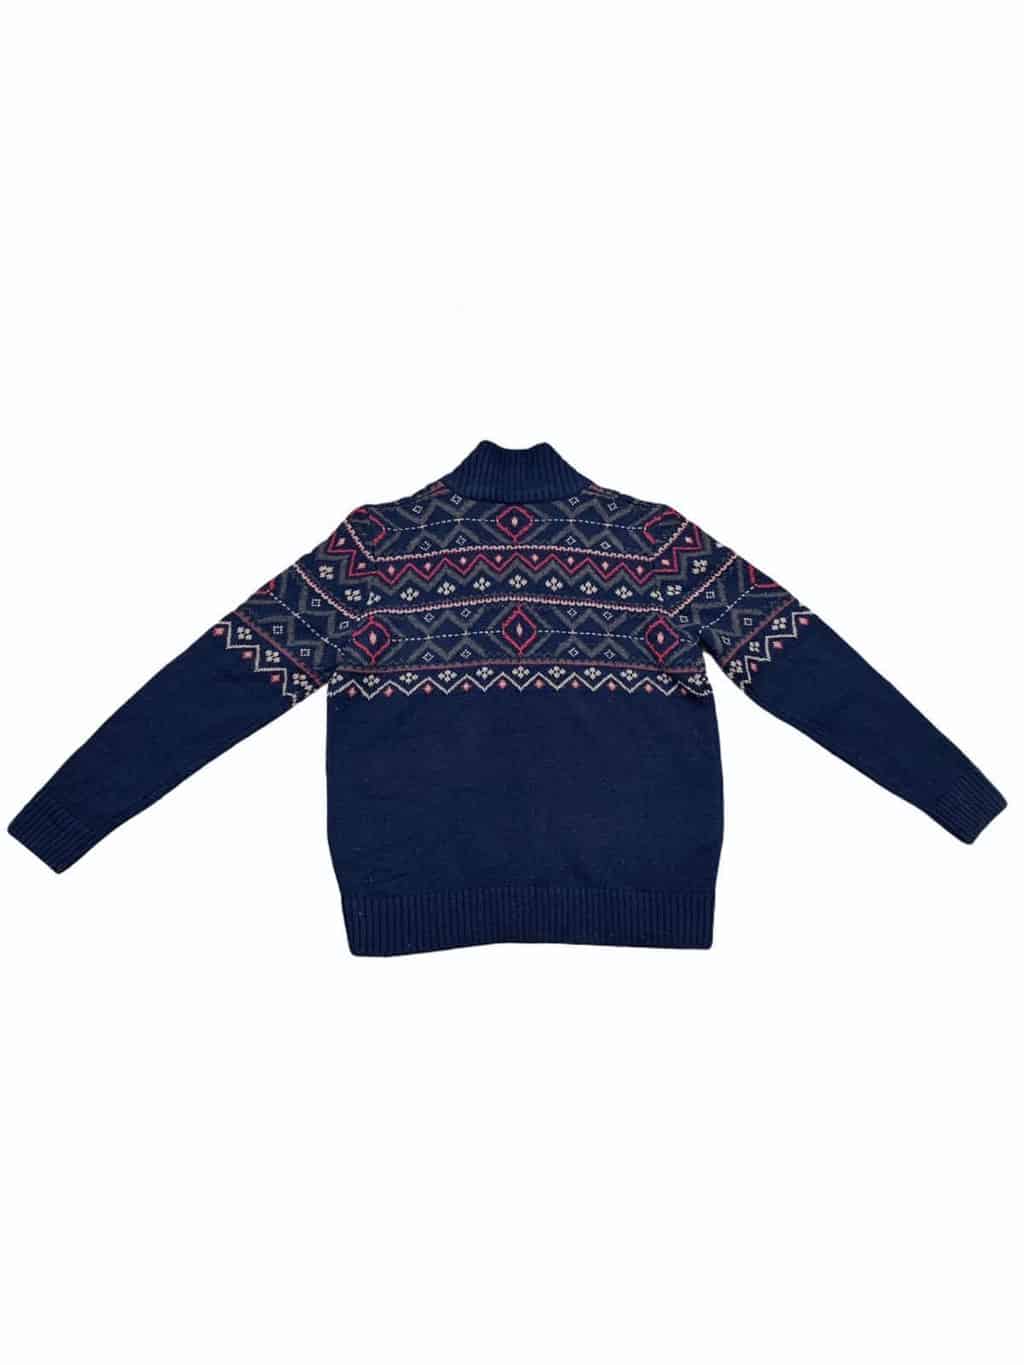 Buy F&F Navy Blue Family Fairisle Knitted Jumper from the Laura